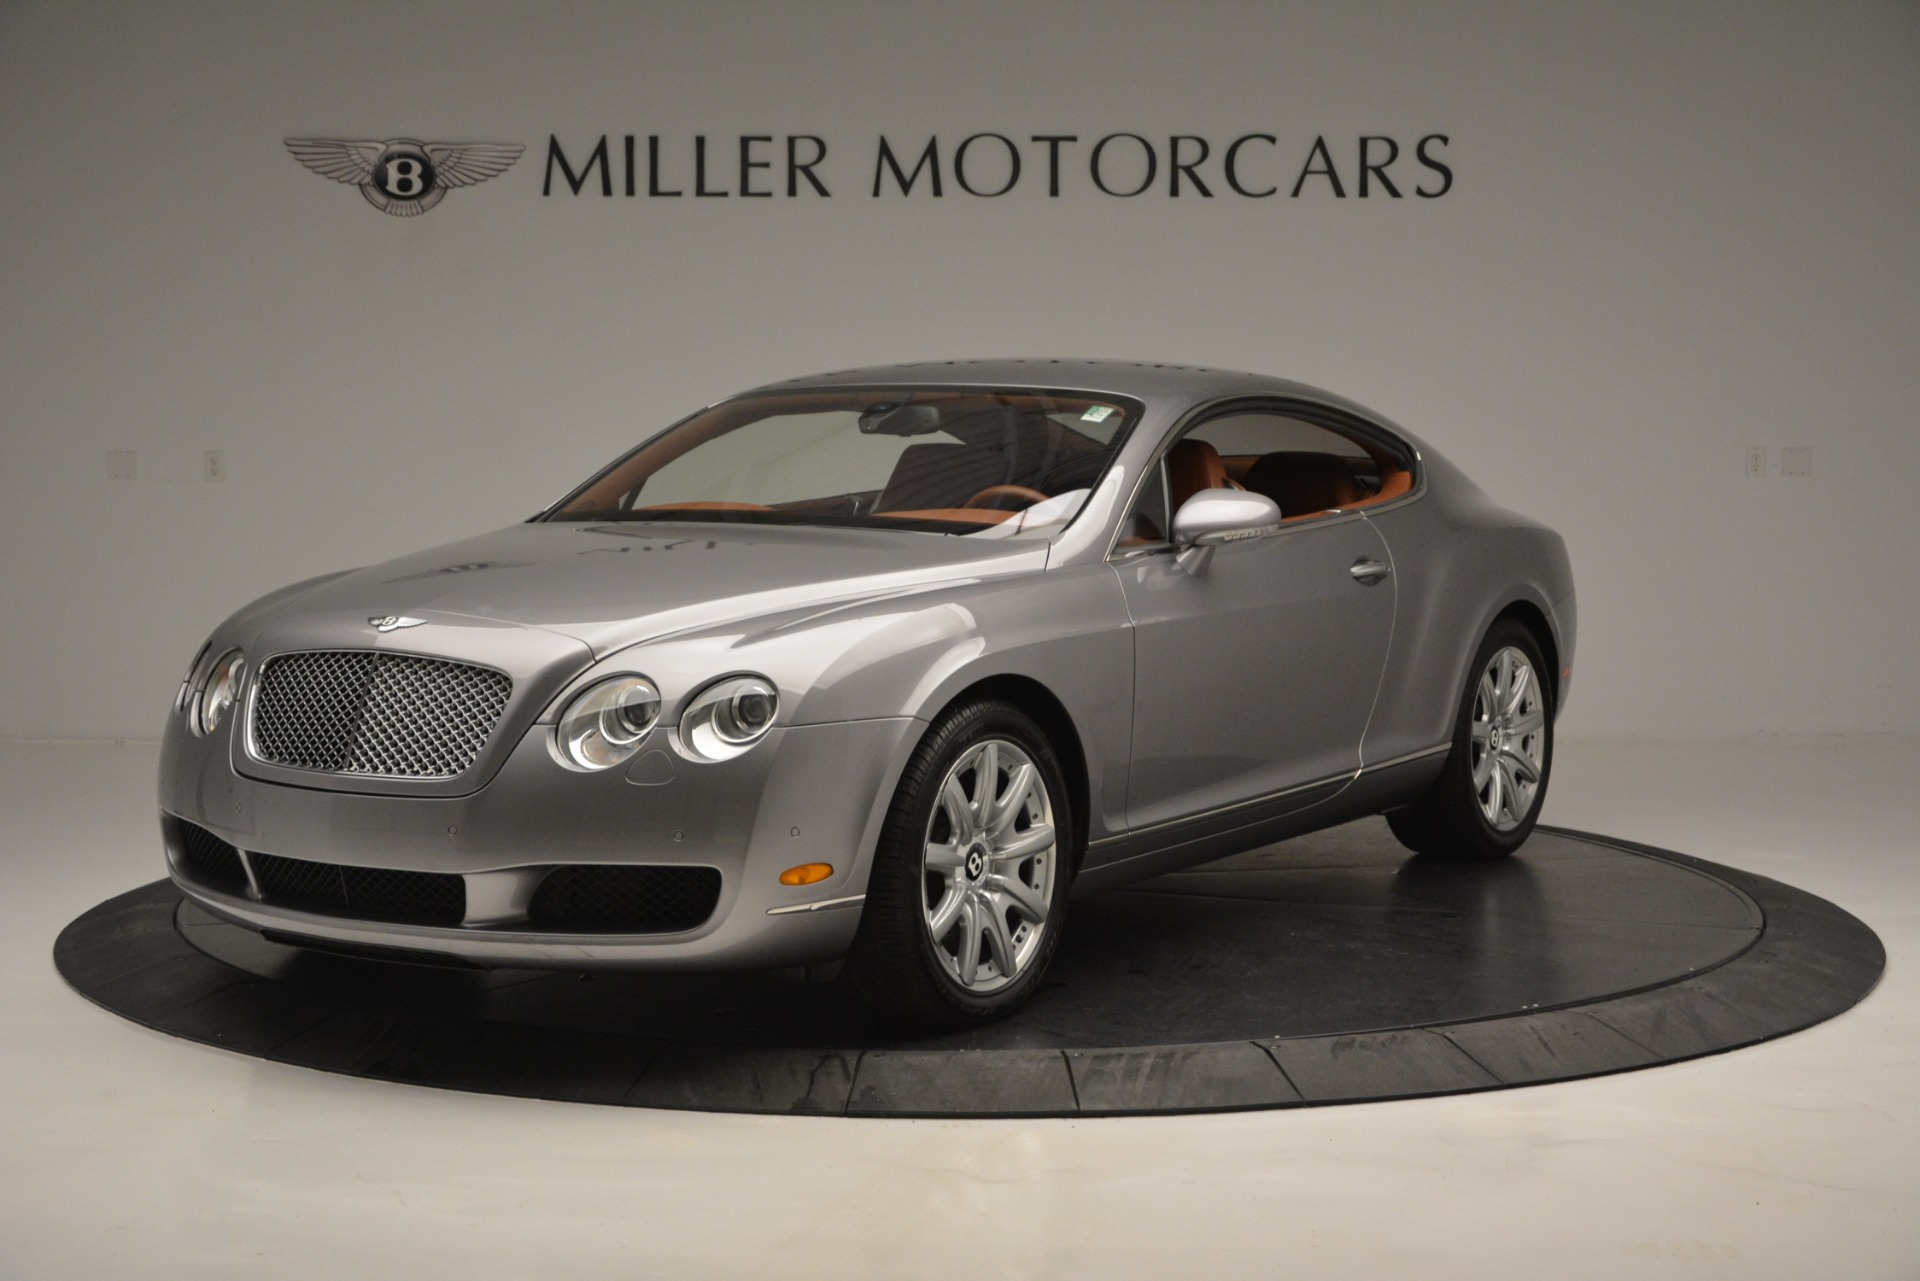 Used 2005 Bentley Continental GT GT Turbo for sale Sold at Alfa Romeo of Greenwich in Greenwich CT 06830 1